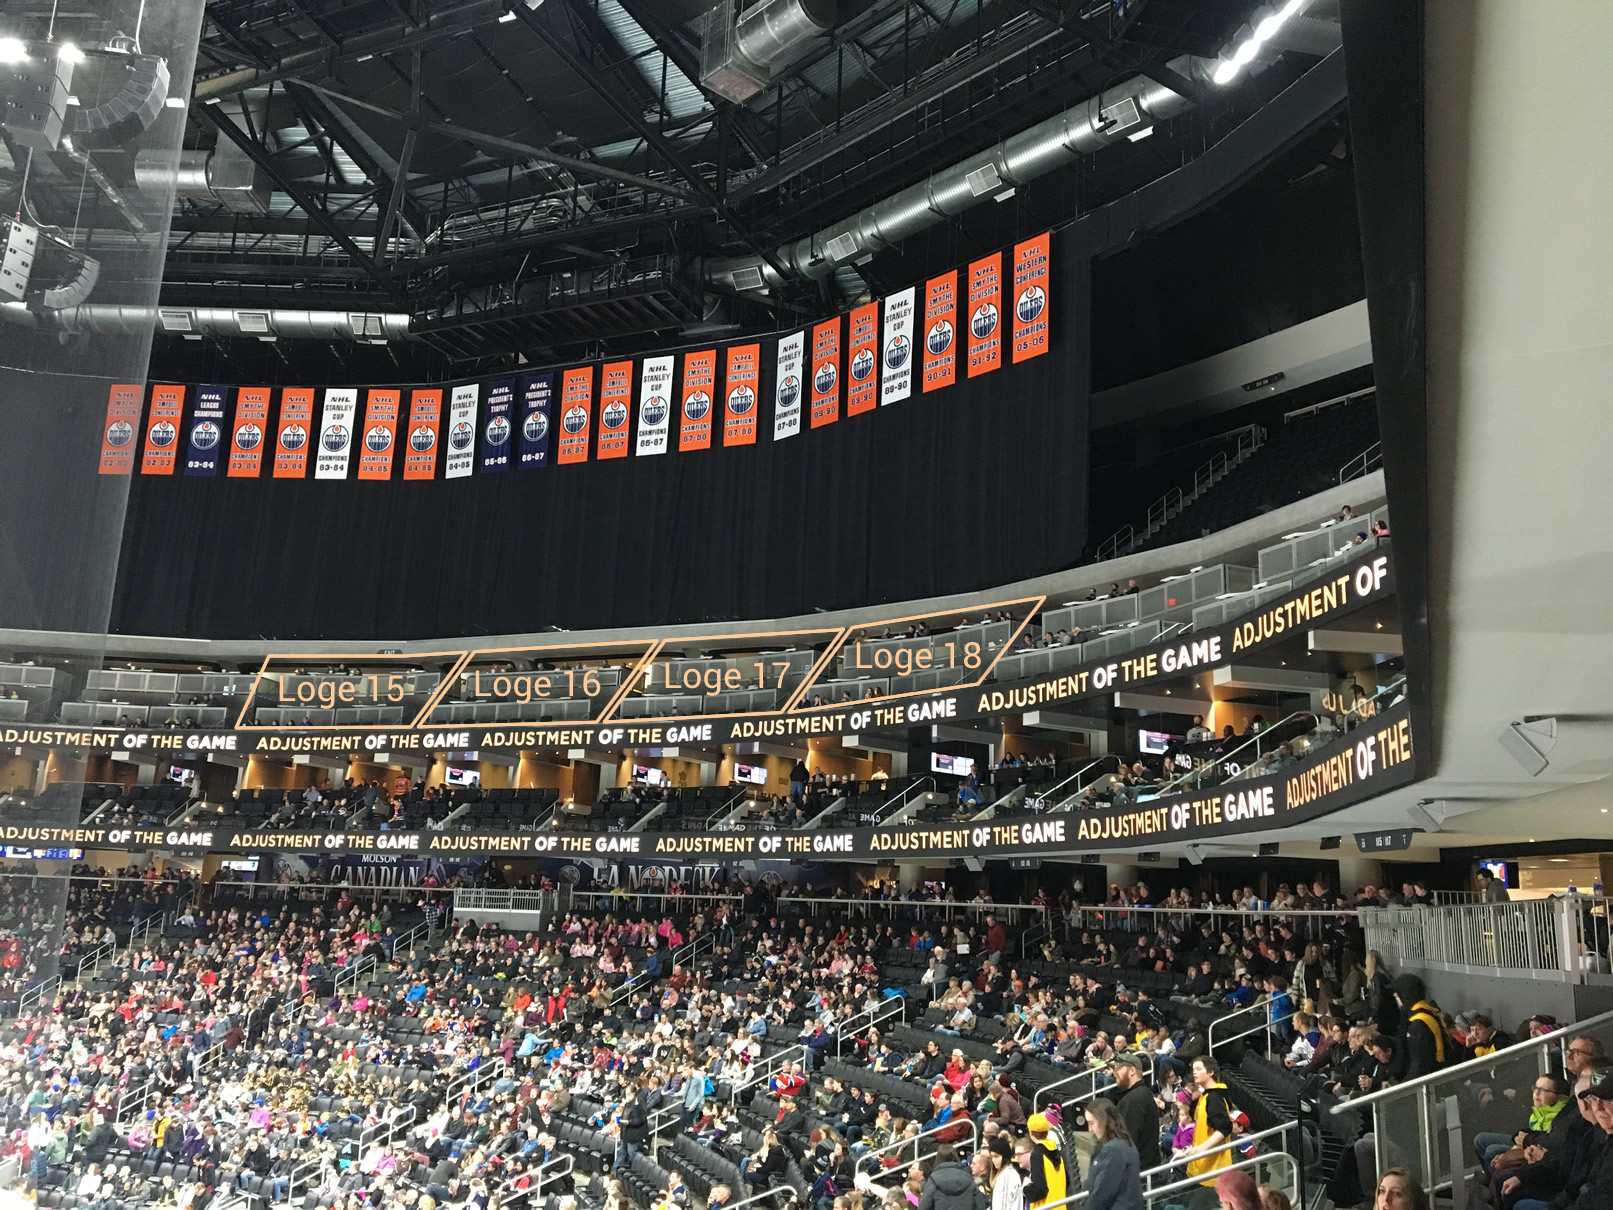 Loge Sections 15-18 at Rogers Place